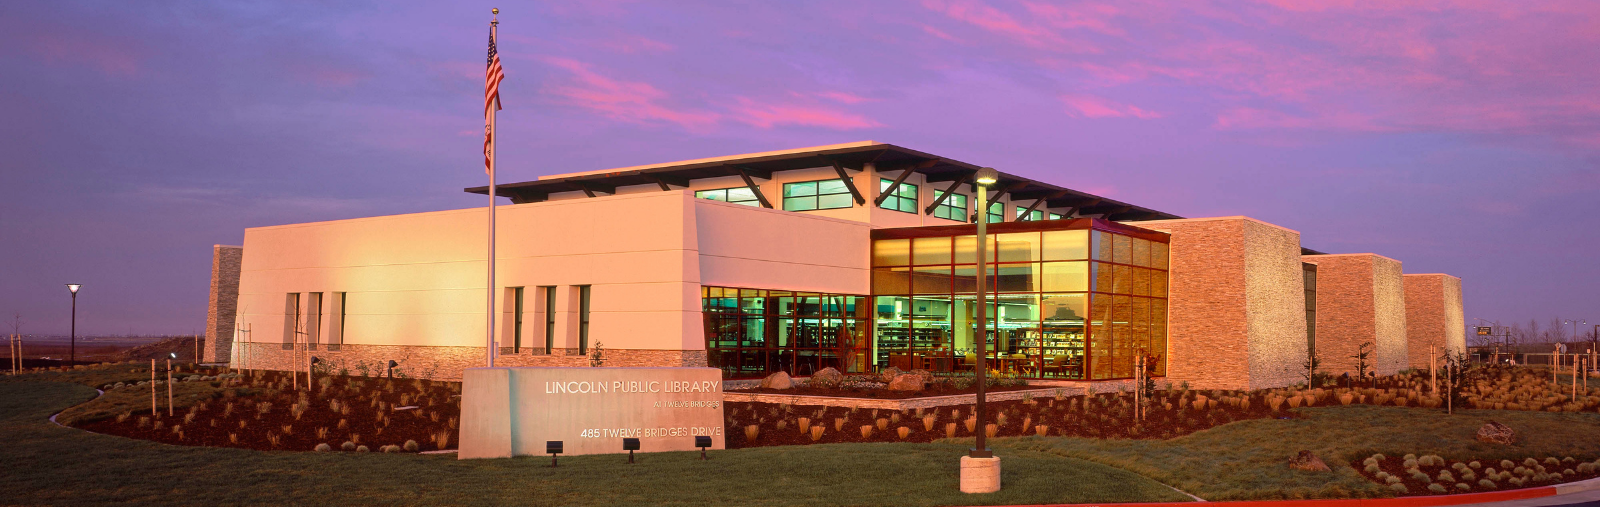 Exterior of the Lincoln Public Library at sunset